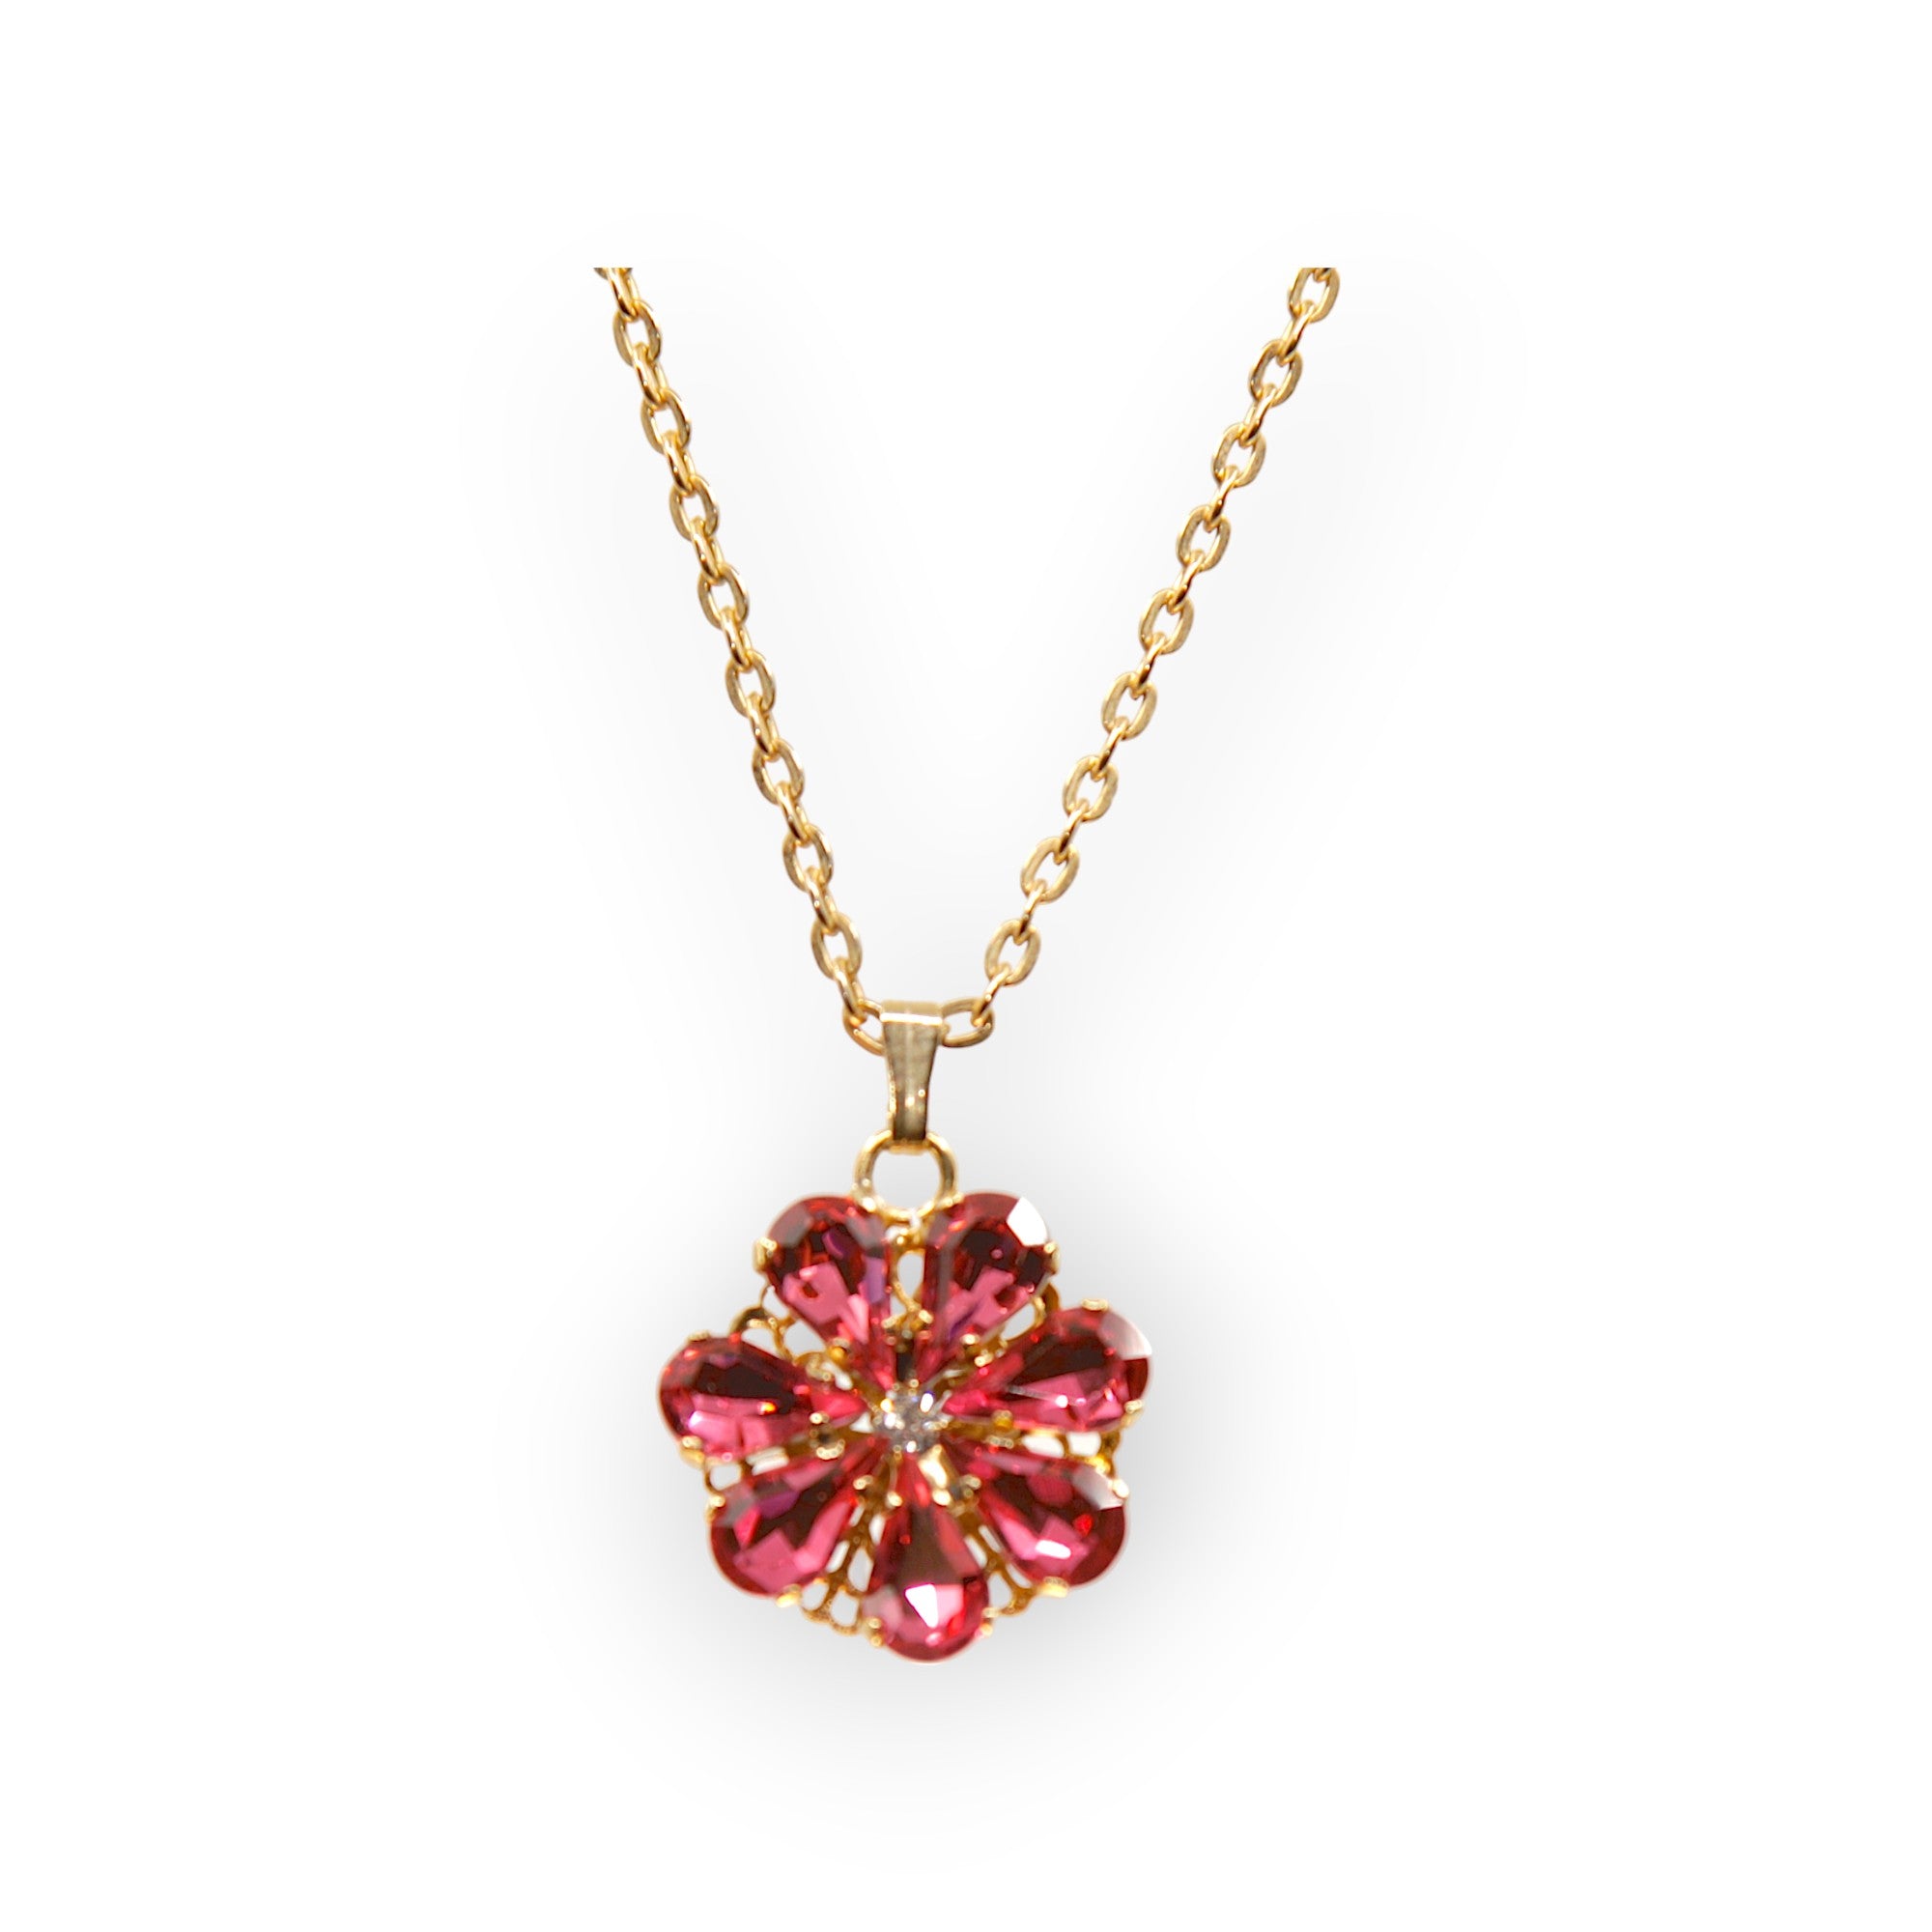 Daisy Pendant Necklace With Crystal Drops In pink shades.